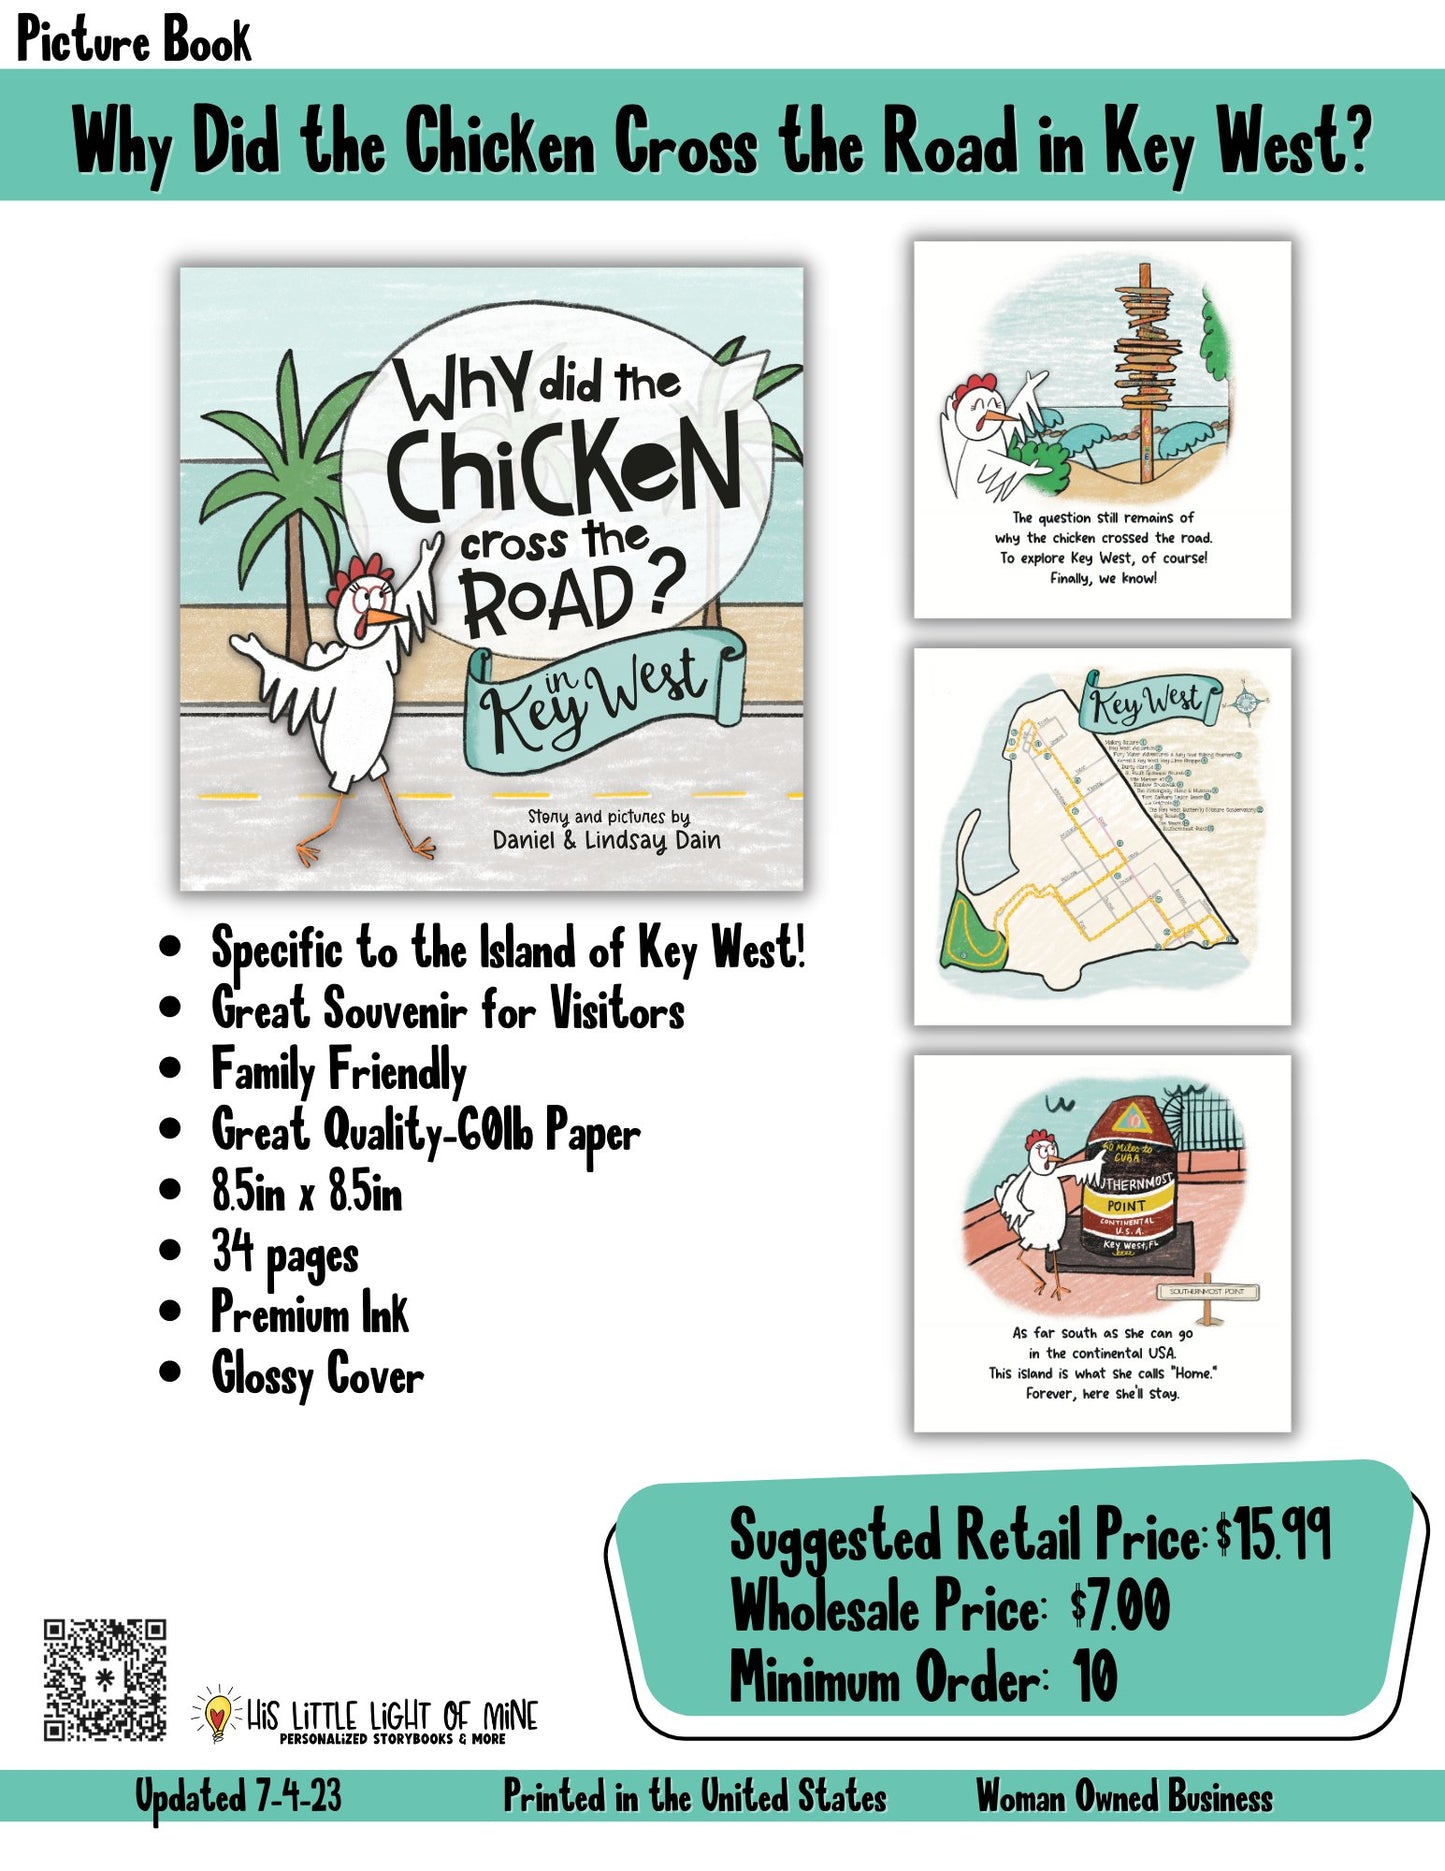 Wholesale ad of the children’s picture book called “Why Did the Chicken Cross the Road in Key West” self-published through Amazon Kindle Direct Publishing